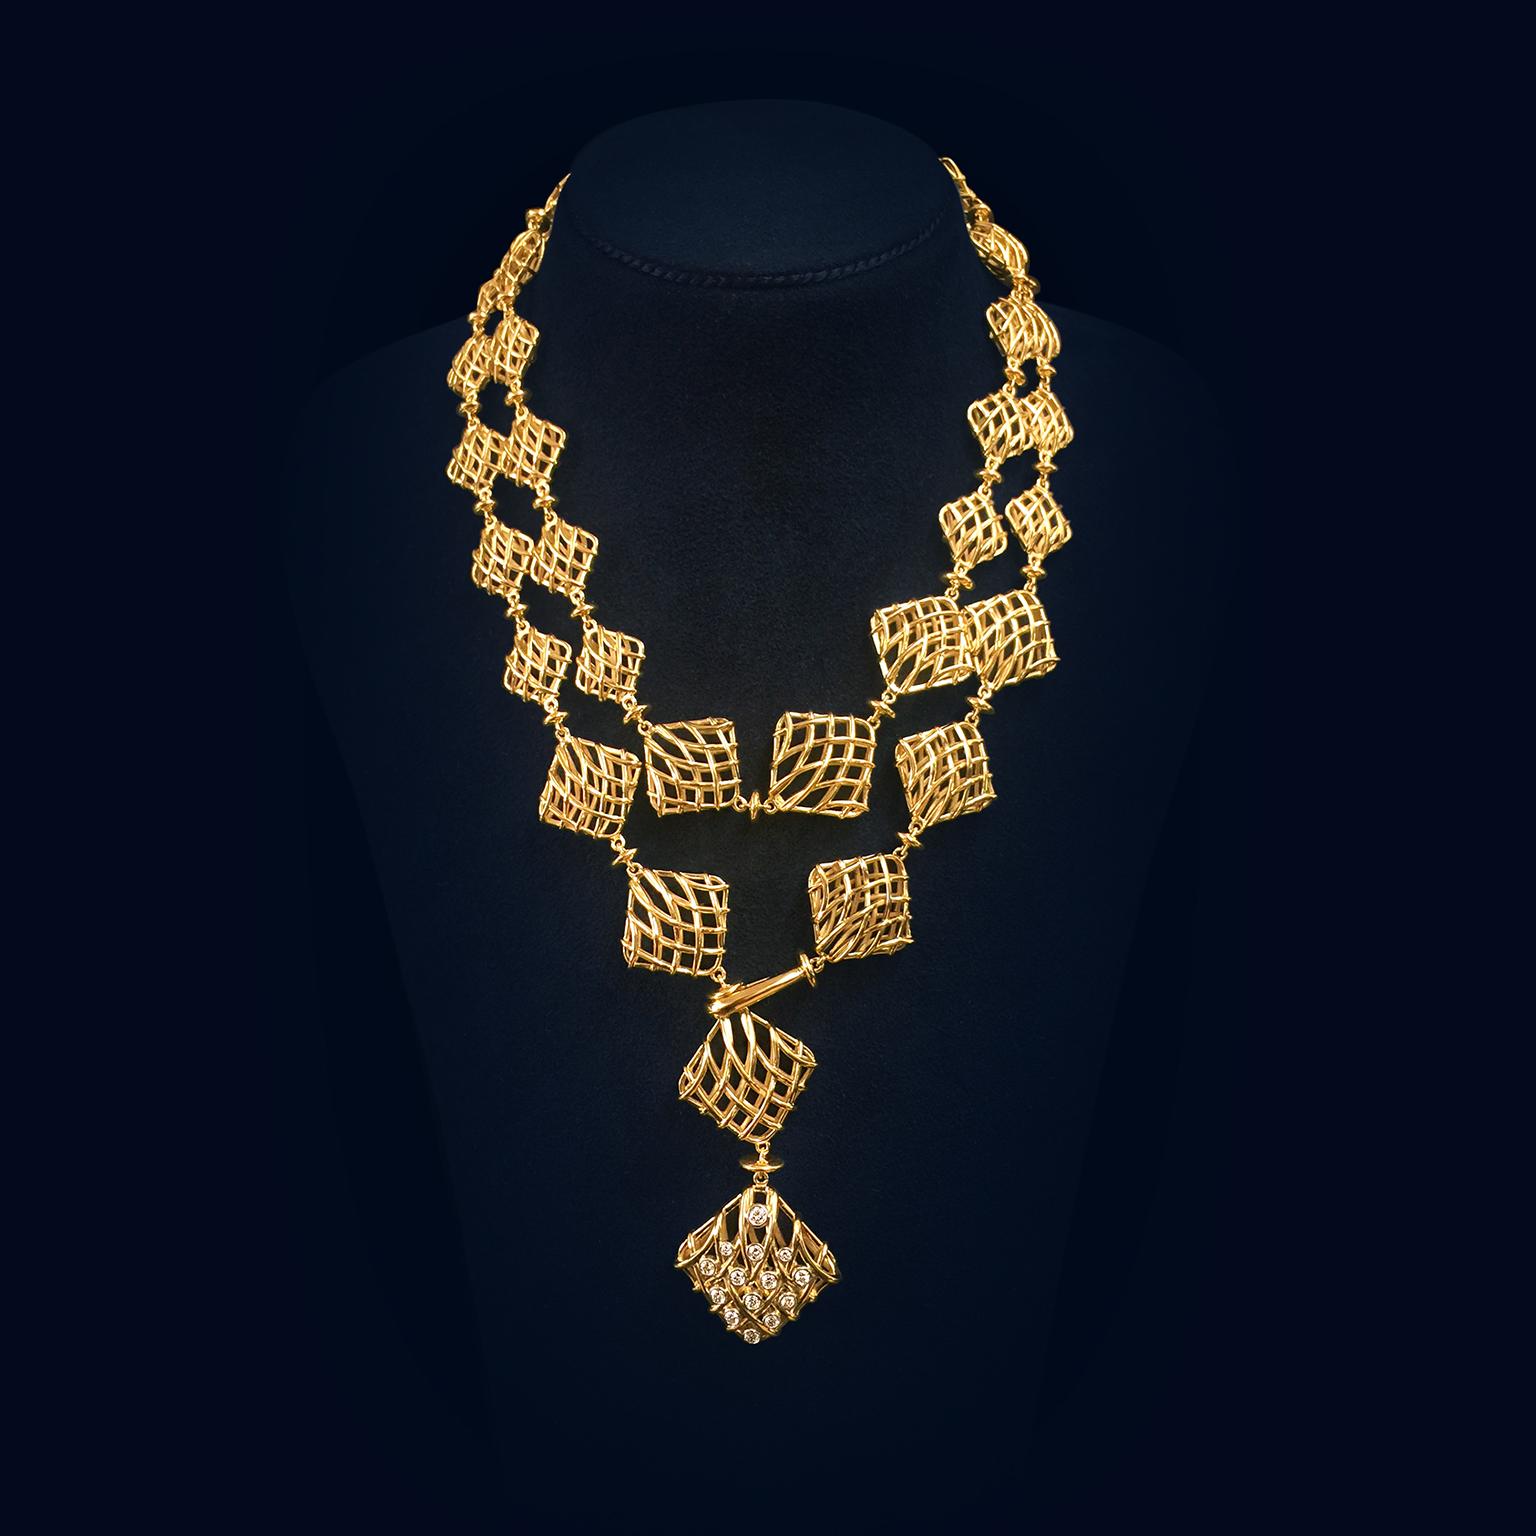 Intricate openwork cushions give this necklace depth and distinction. 18k yellow gold wires cross over in a basket weave to form cushion shapes that circulate in a repeated pattern of large to small. In between each cushion is a round disk. A swan